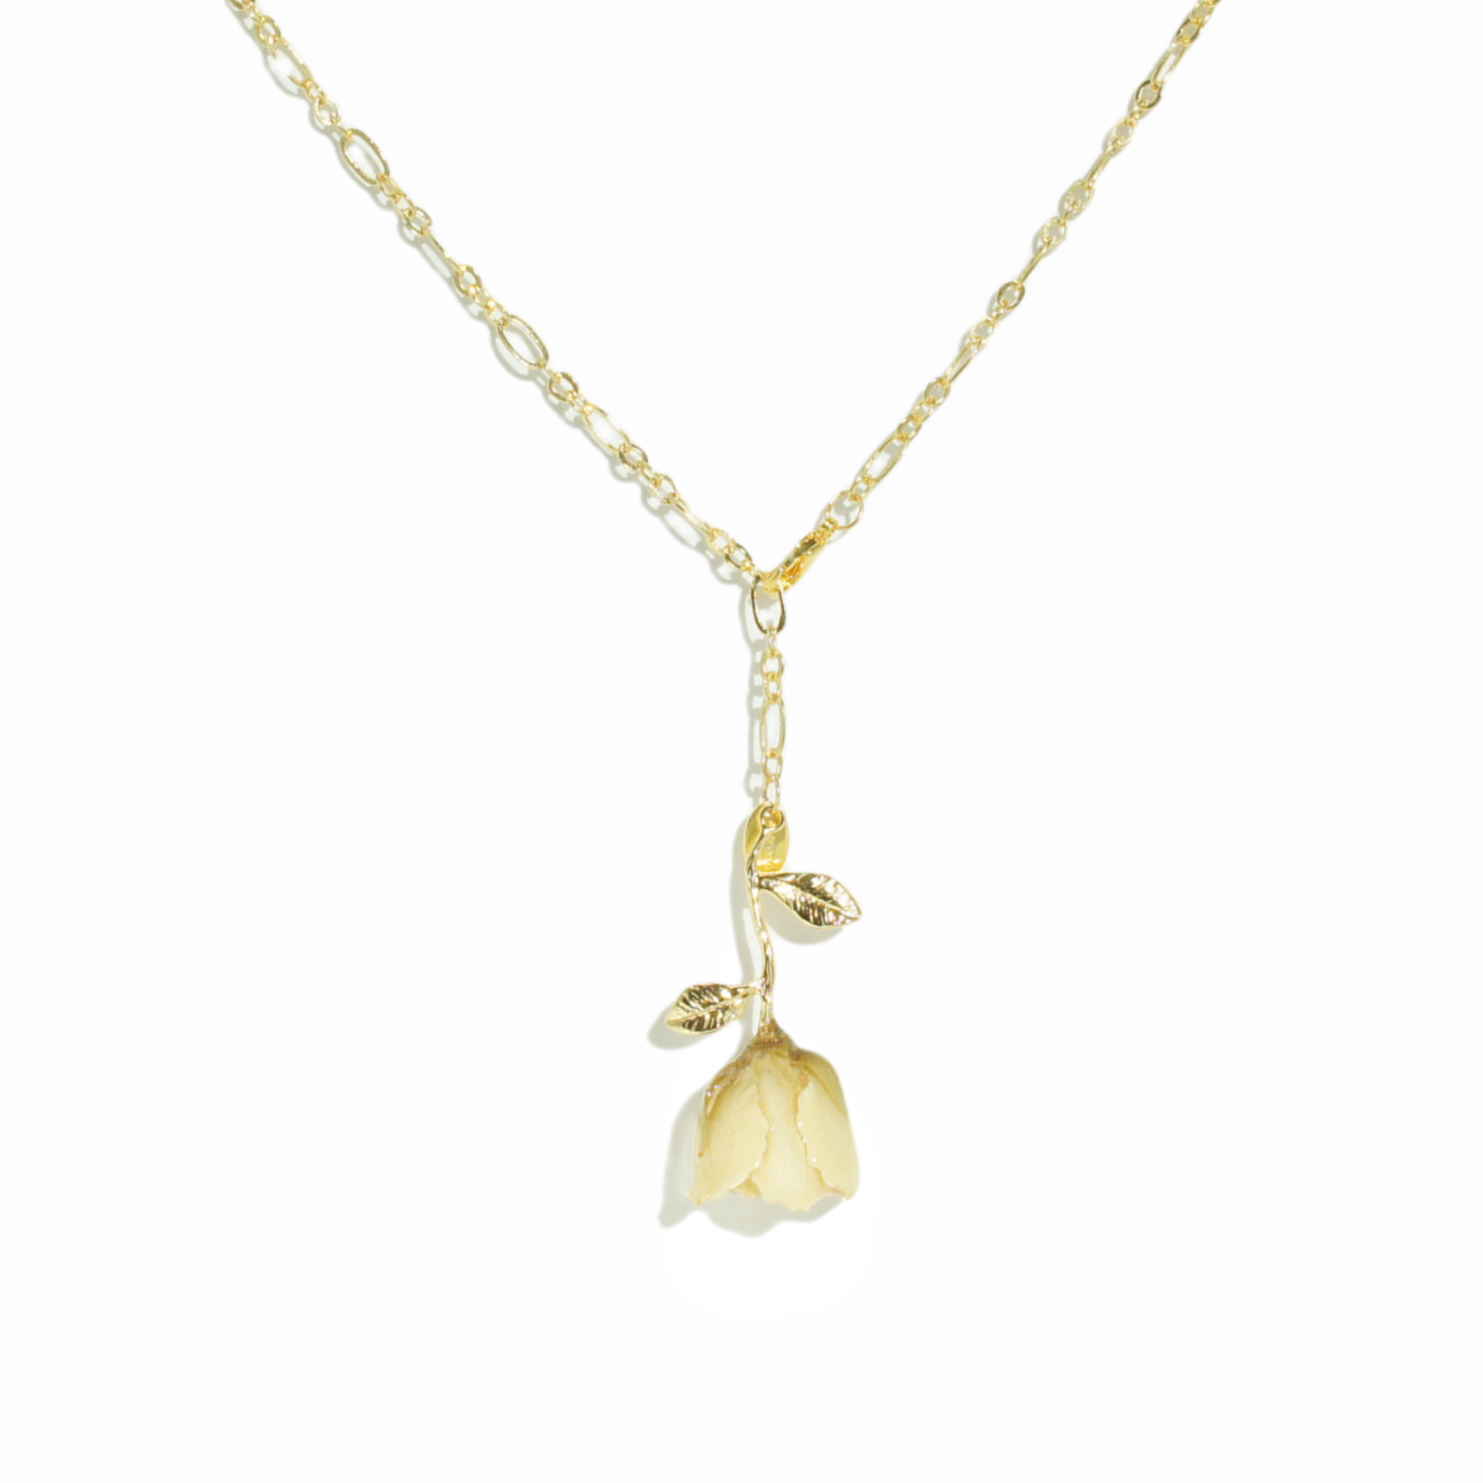 *REAL FLOWER* Rosa Blanca Chain Necklace with Rosebud Pendant, Length Adjustable